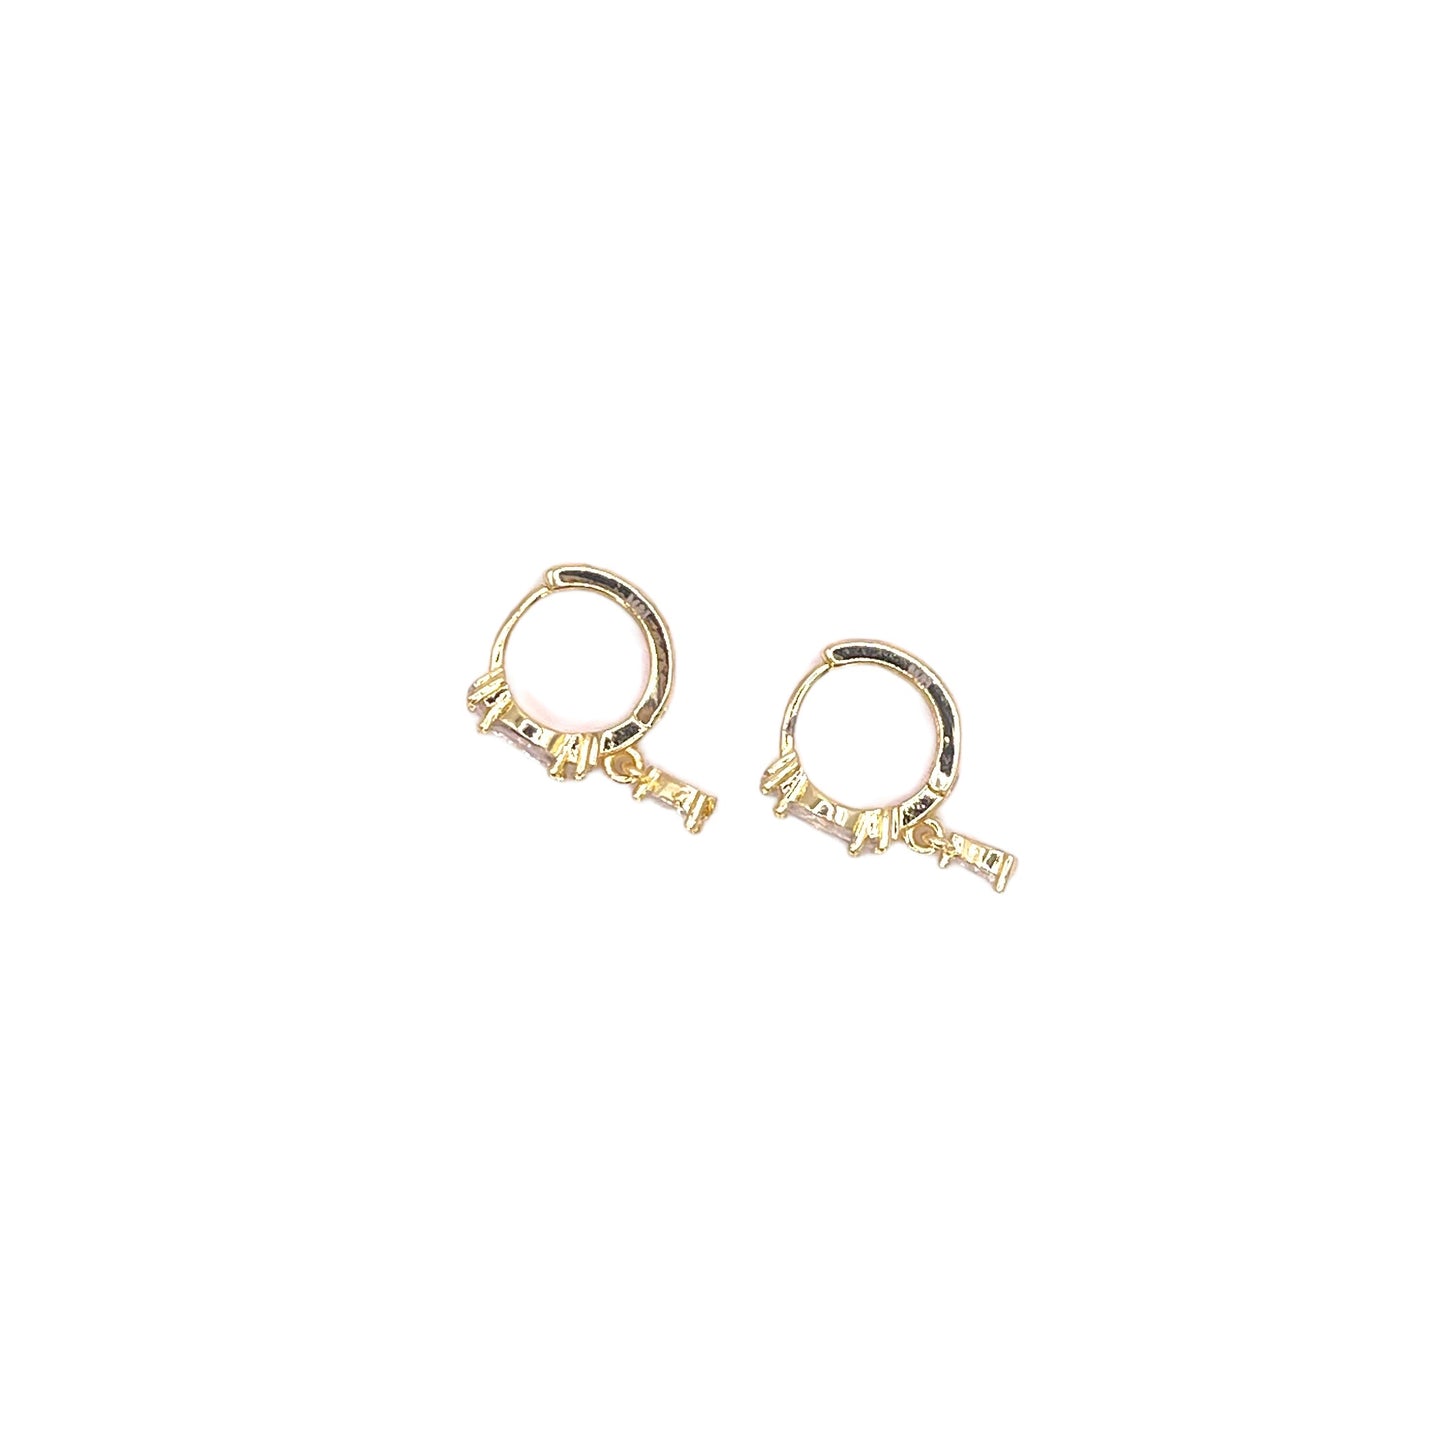 Nataly Gold Earrings